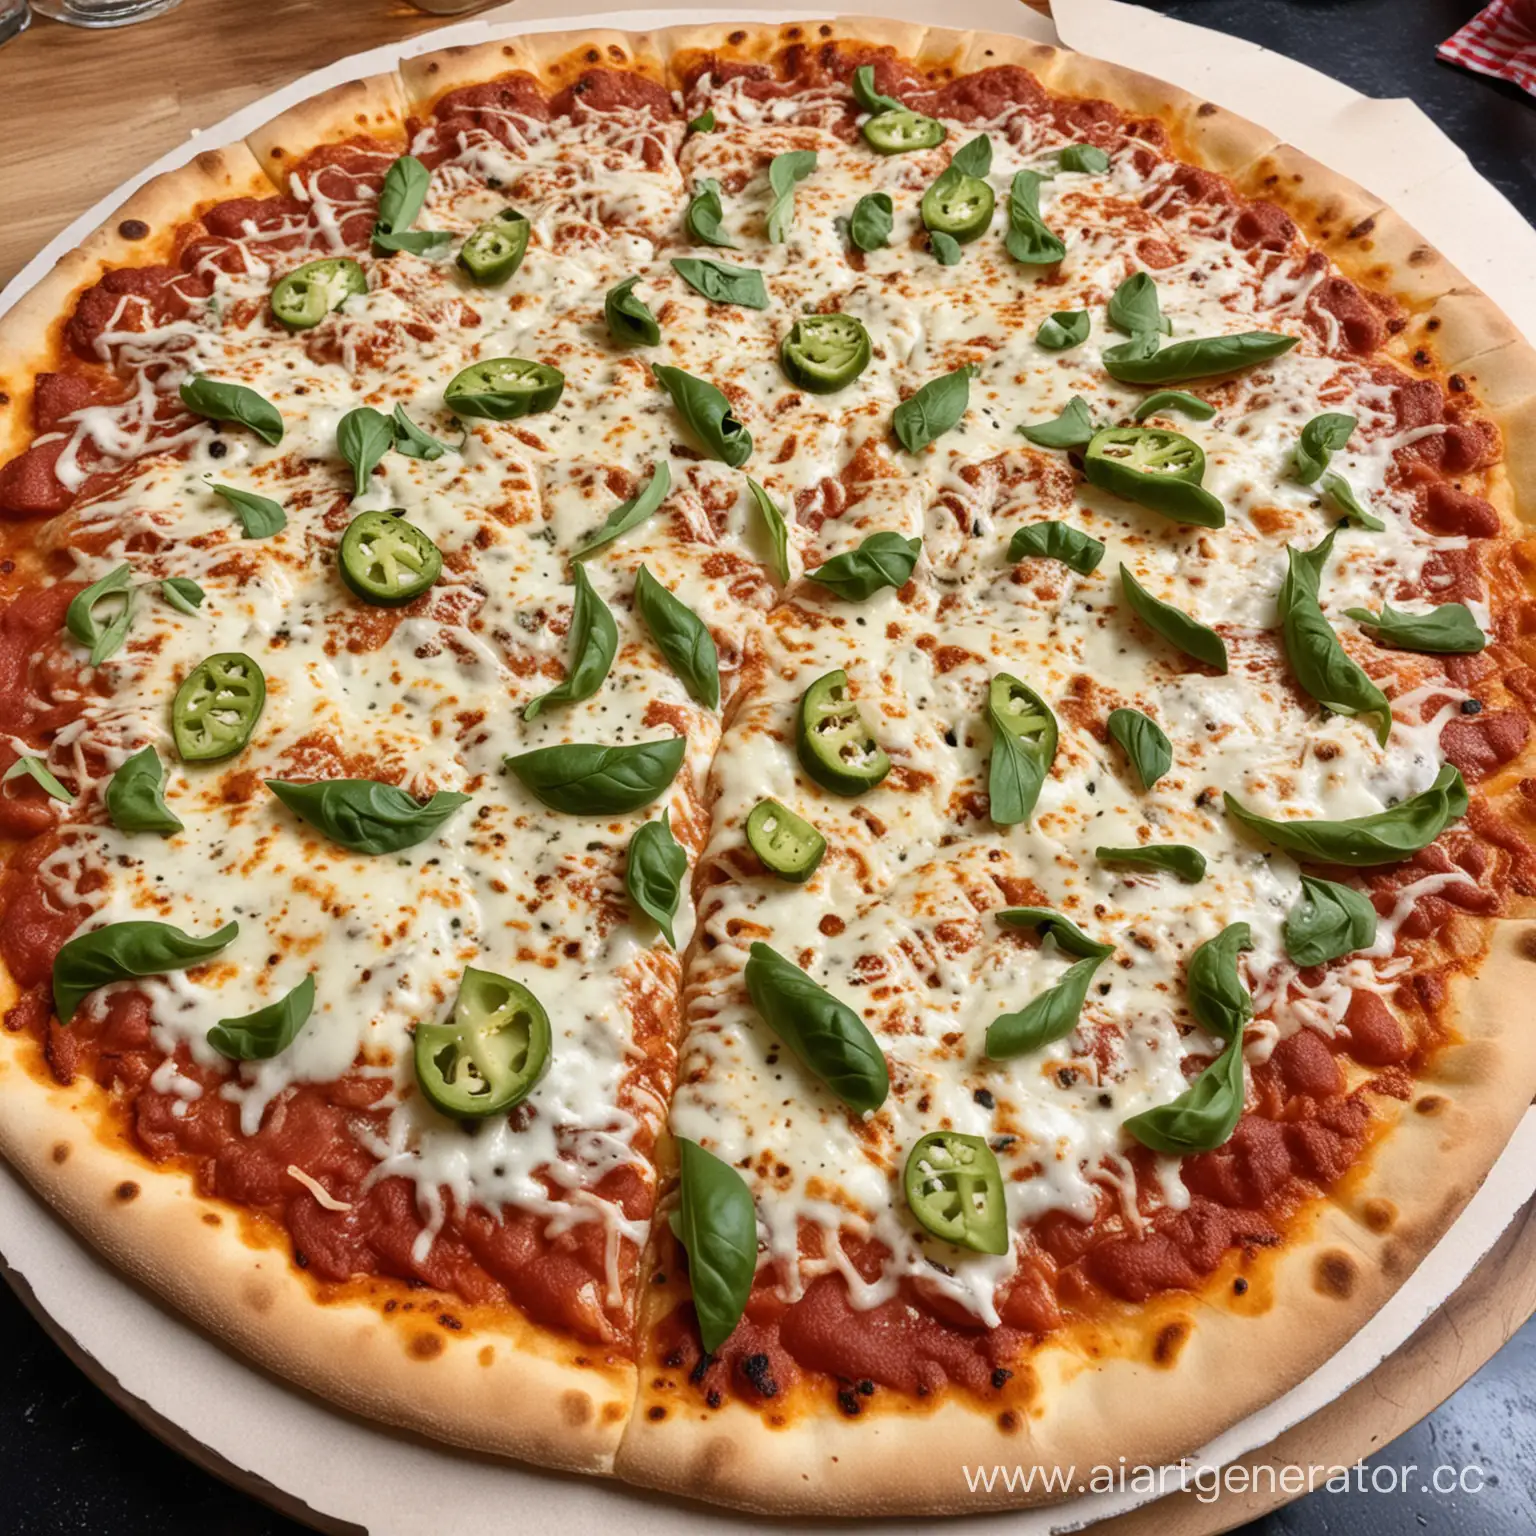 Freshly-Baked-Pizza-Margarita-with-Vibrant-Tomato-and-Basil-Toppings